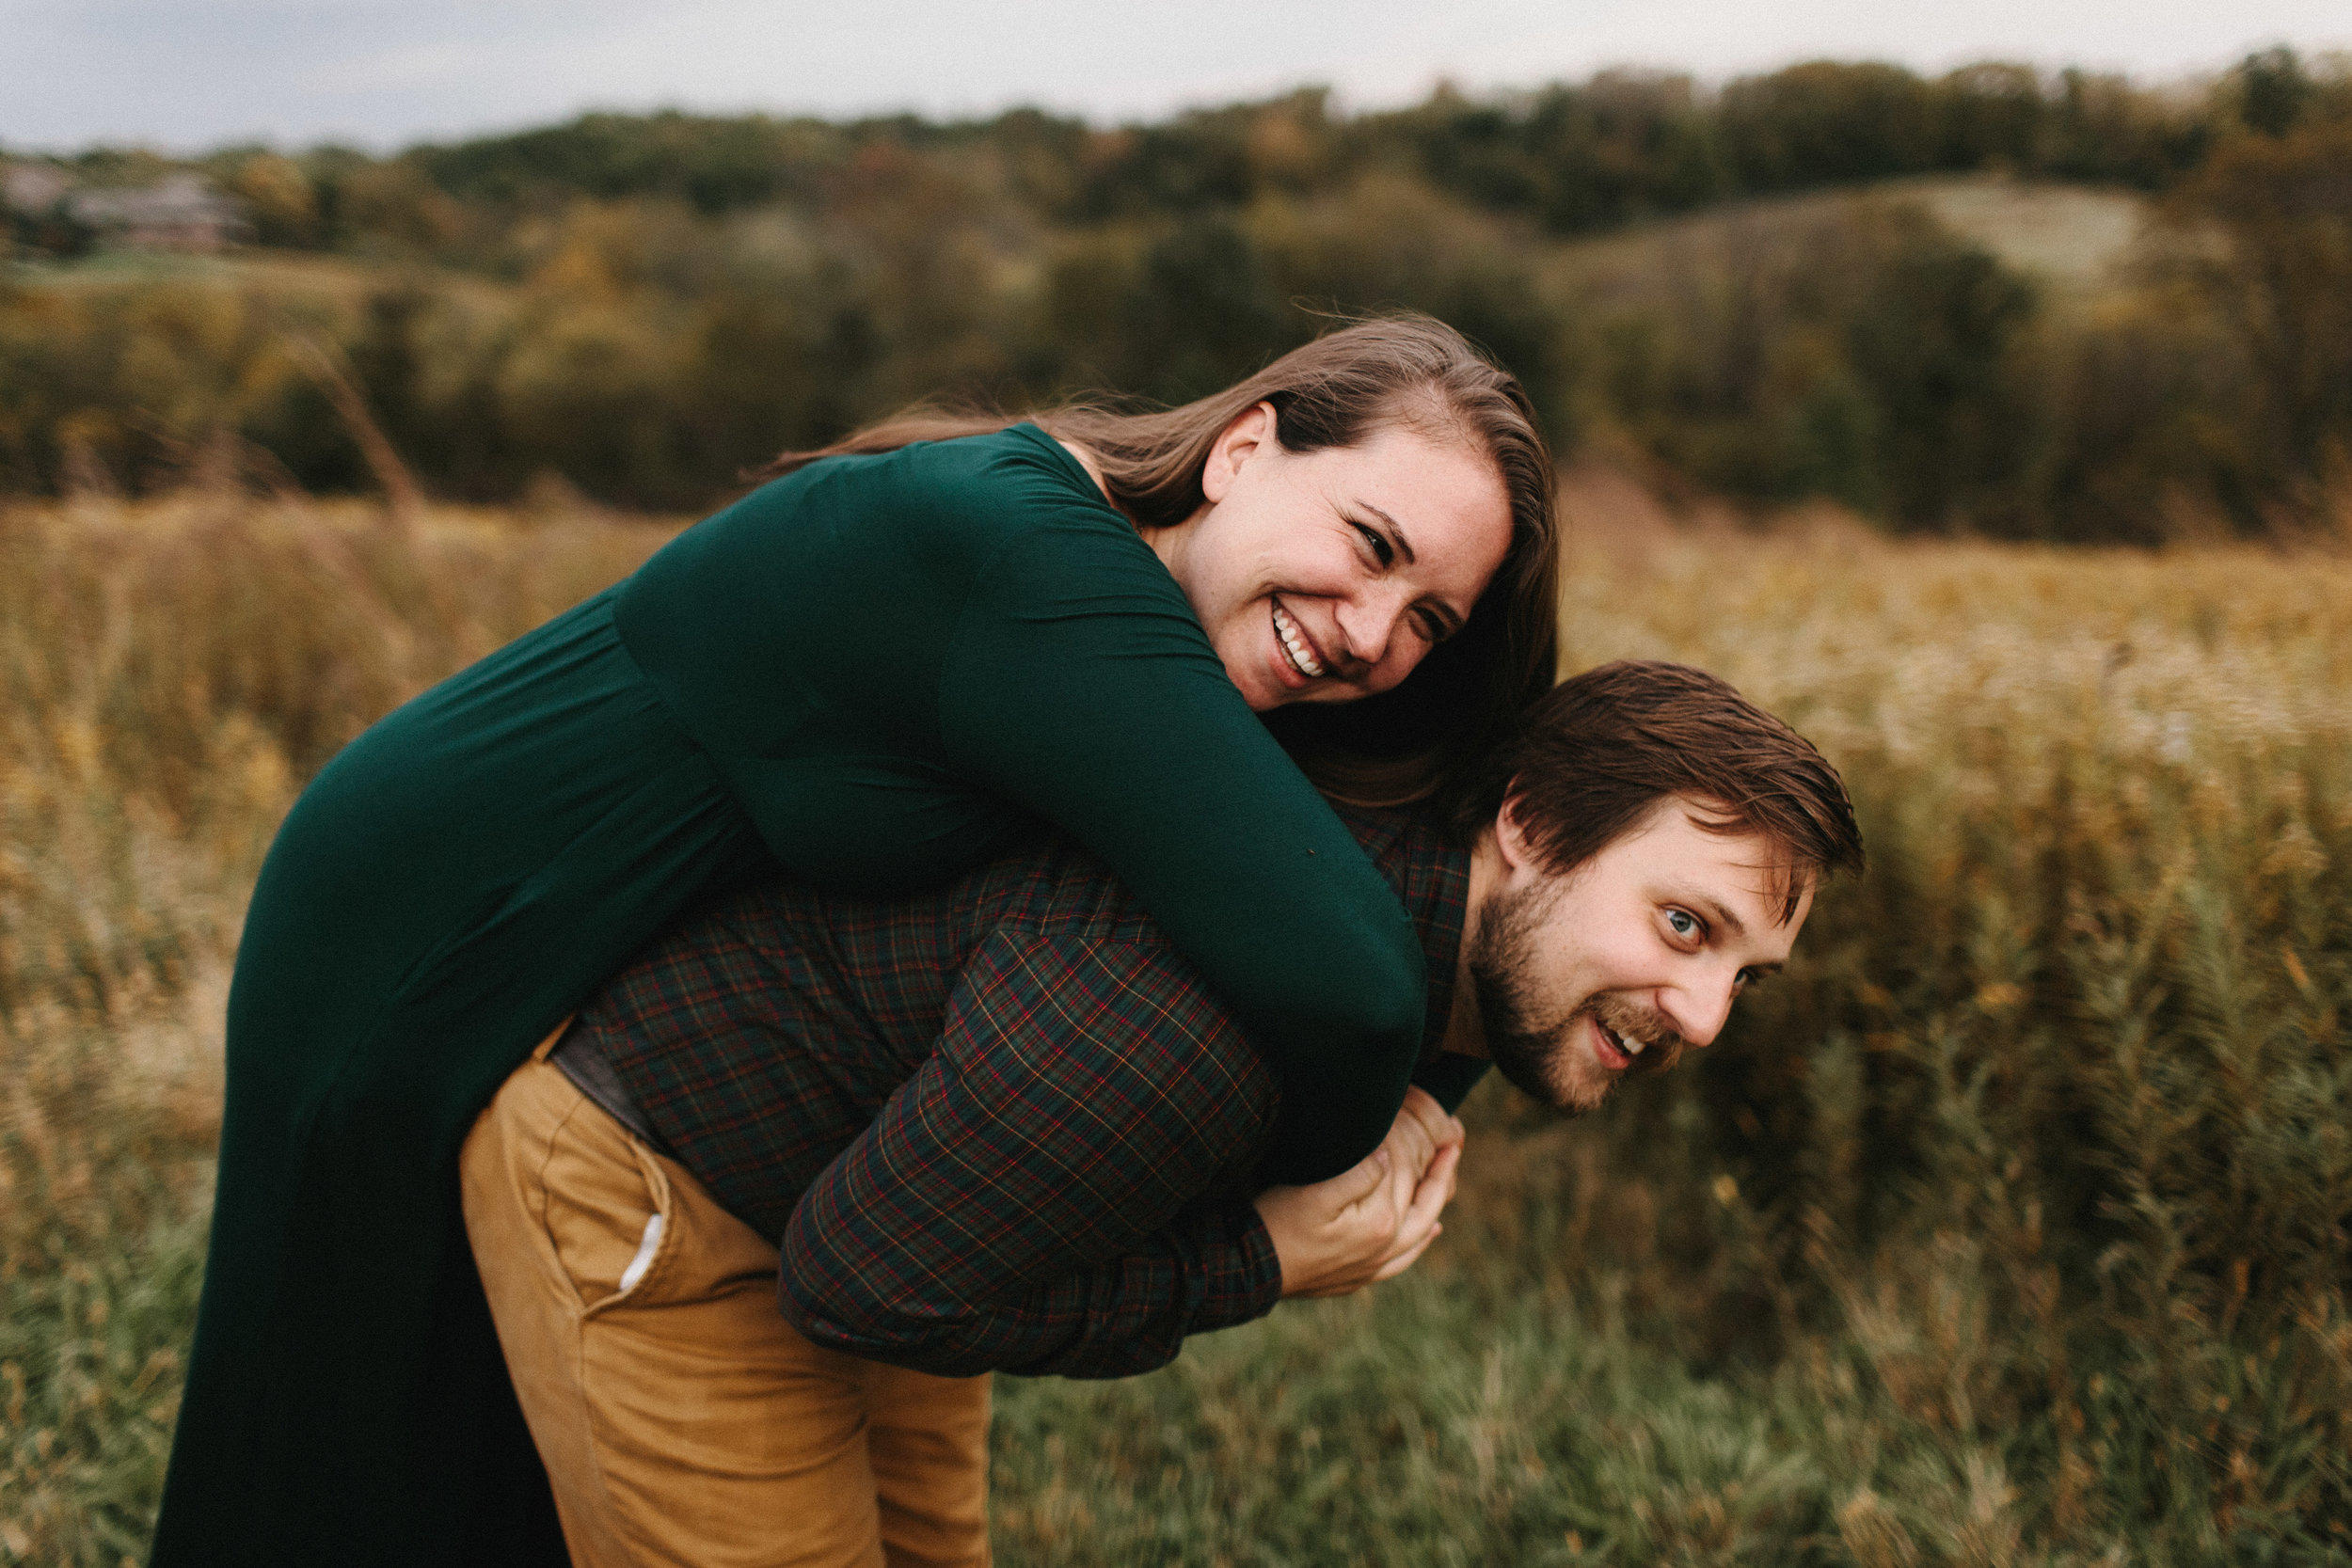 iowa_city_engagement_adventure_prairie_graduate_at_home_dog_couples_downtown_wilsons_orchard_1269.jpg